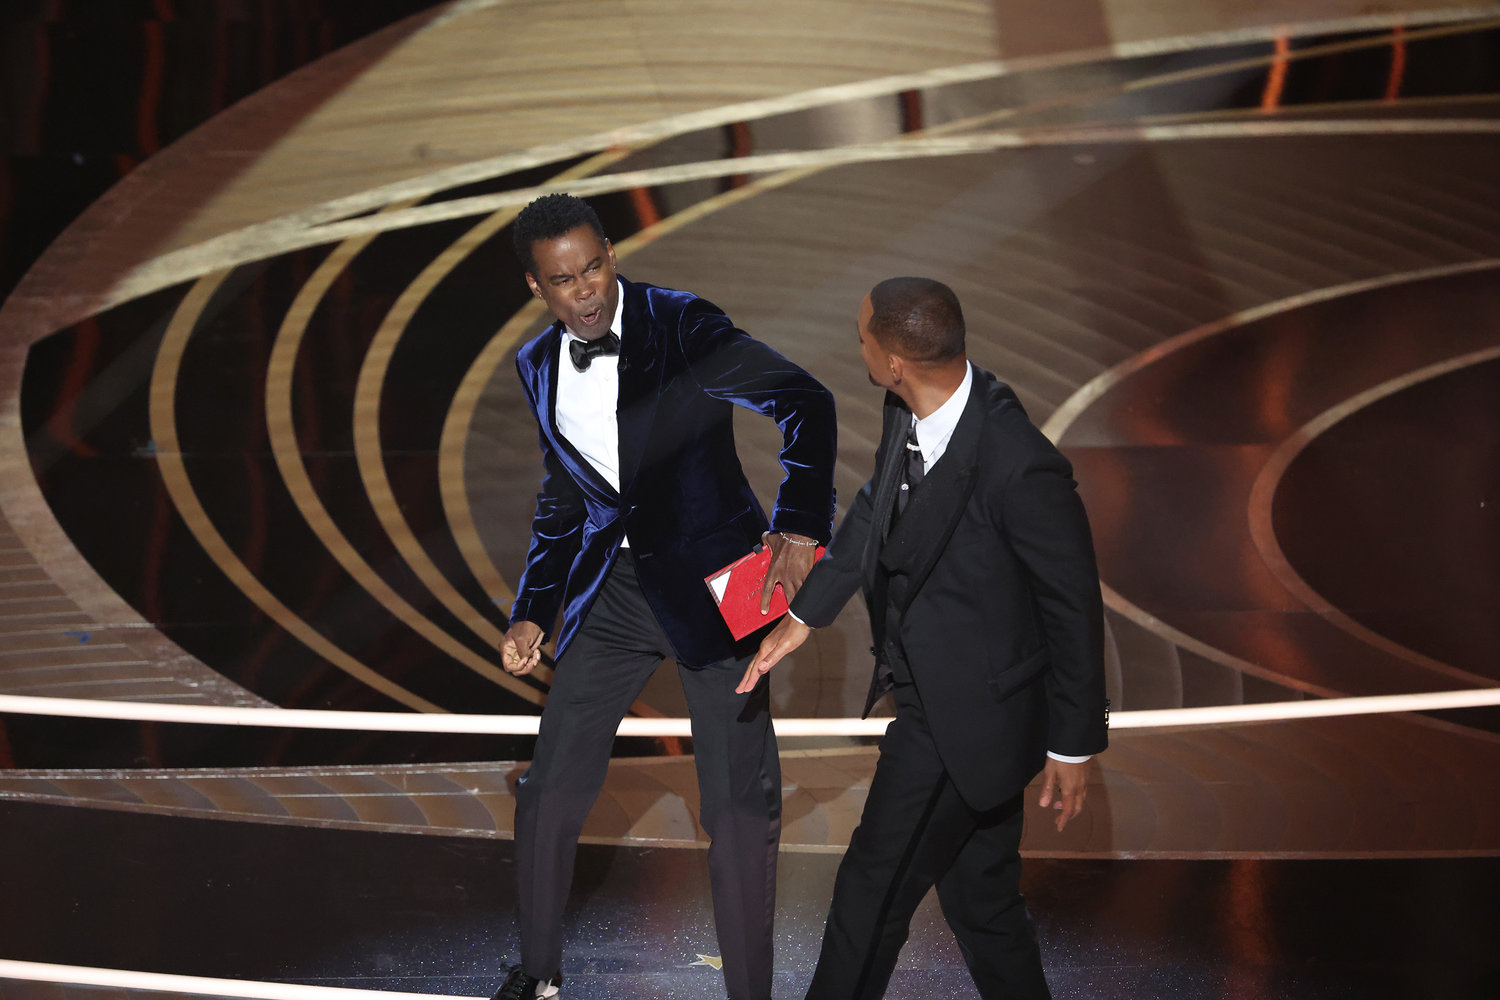 Chris Rock, left, and Will Smith onstage during the 94th Academy Awards at the Dolby Theatre on March 27, 2022, in Hollywood, California. (Myung Chun/Los Angeles Times/TNS)